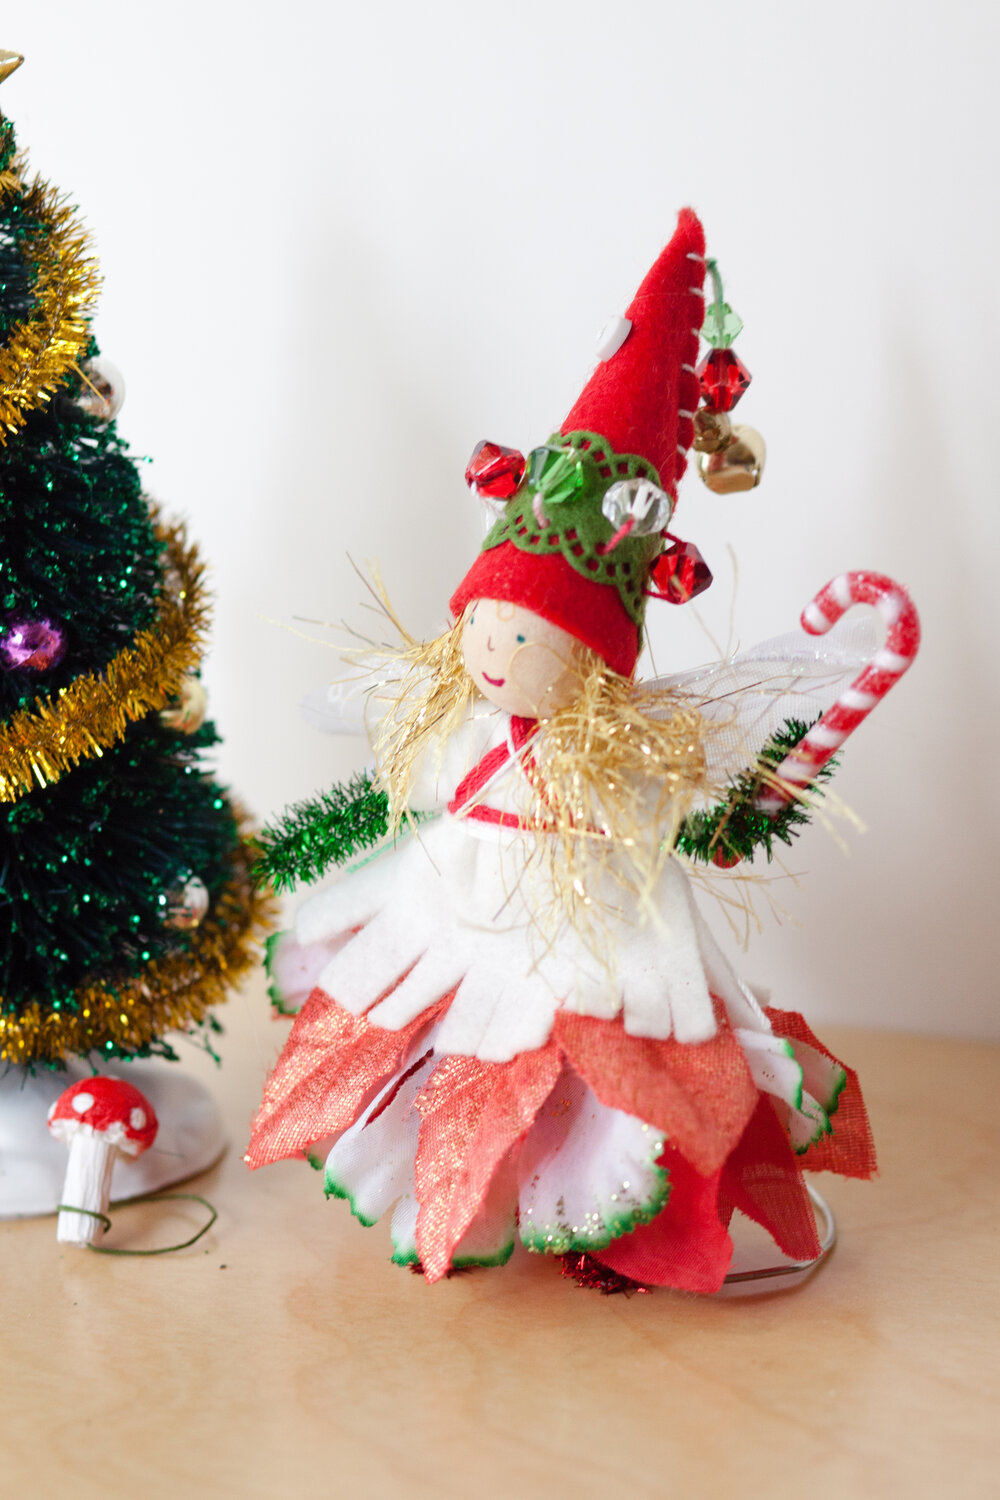 Handmade Holidays with Forest Fairy Crafts for Seasonal Gifts and Decor